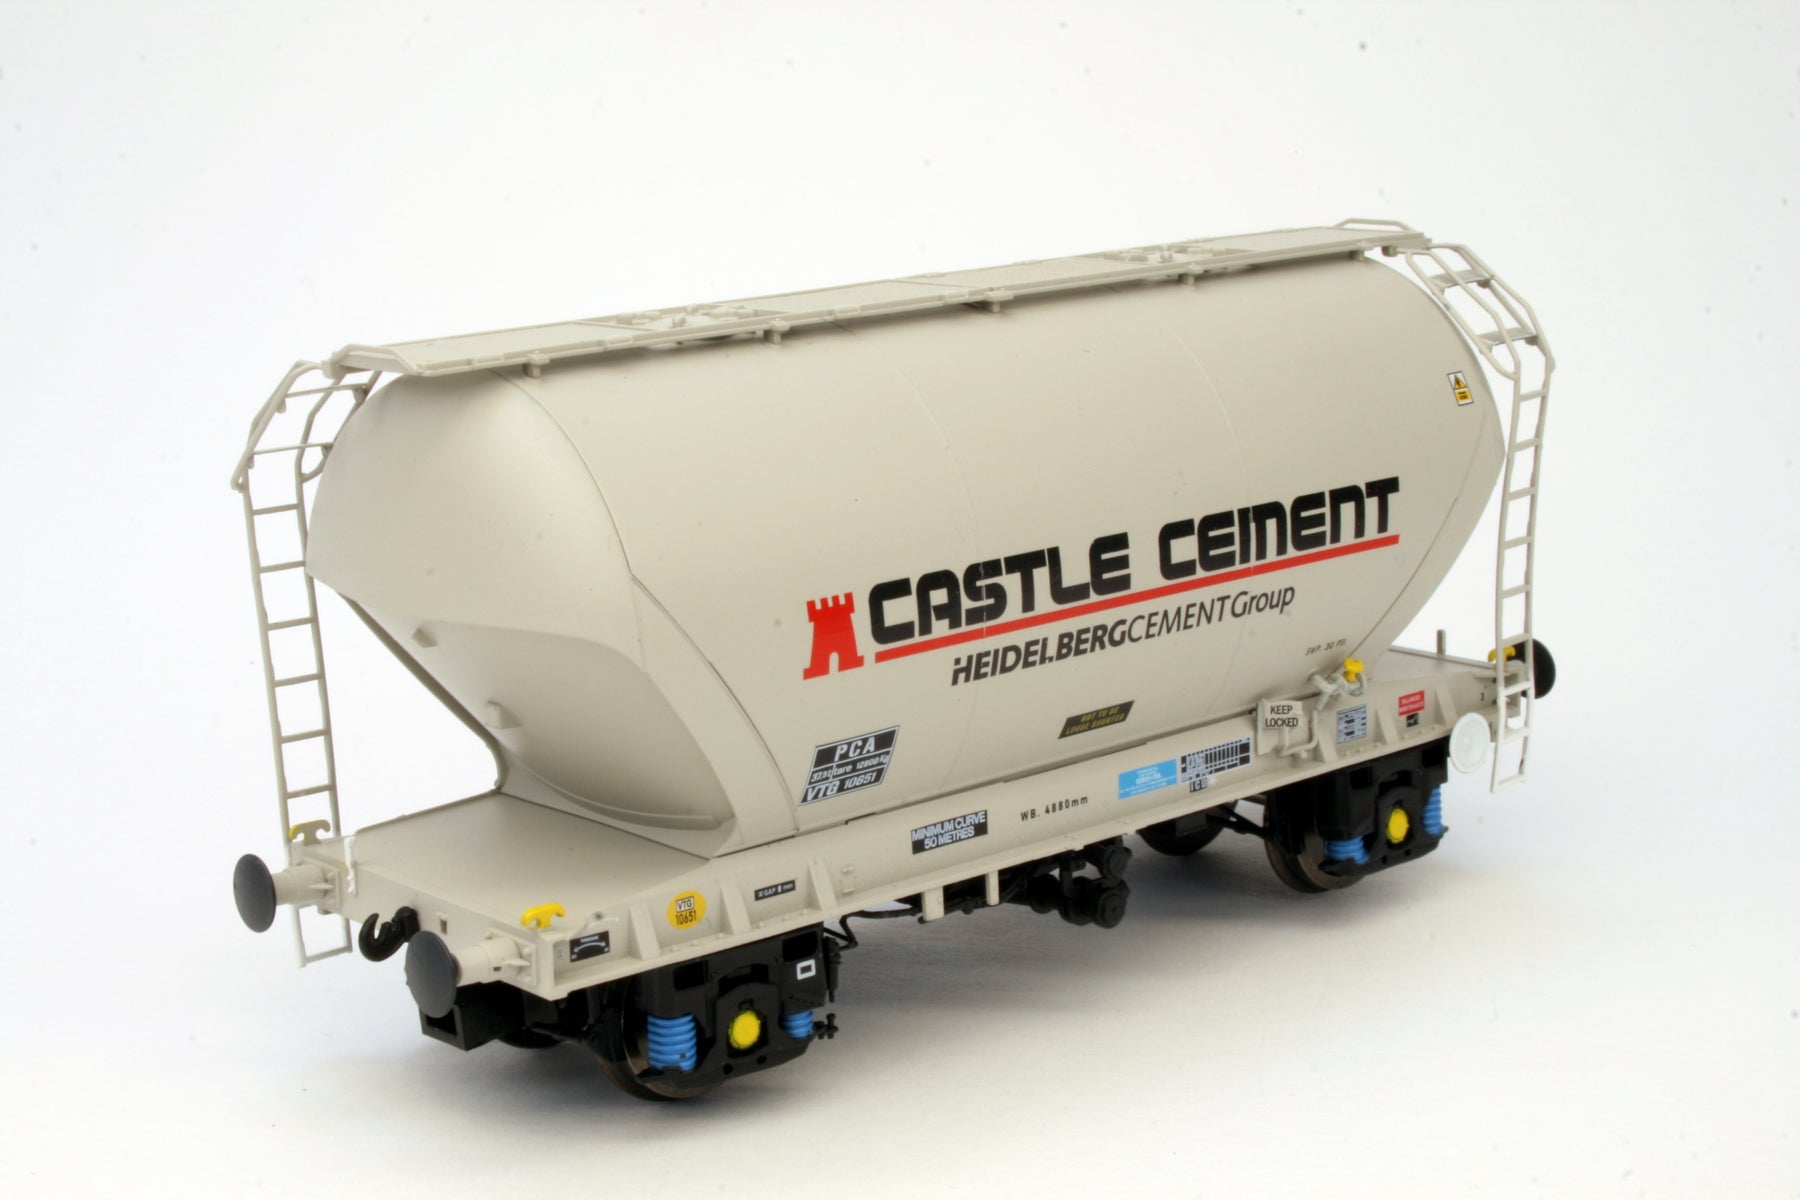 Kings of The Castle - New Castle Cement PCA Run Announced!